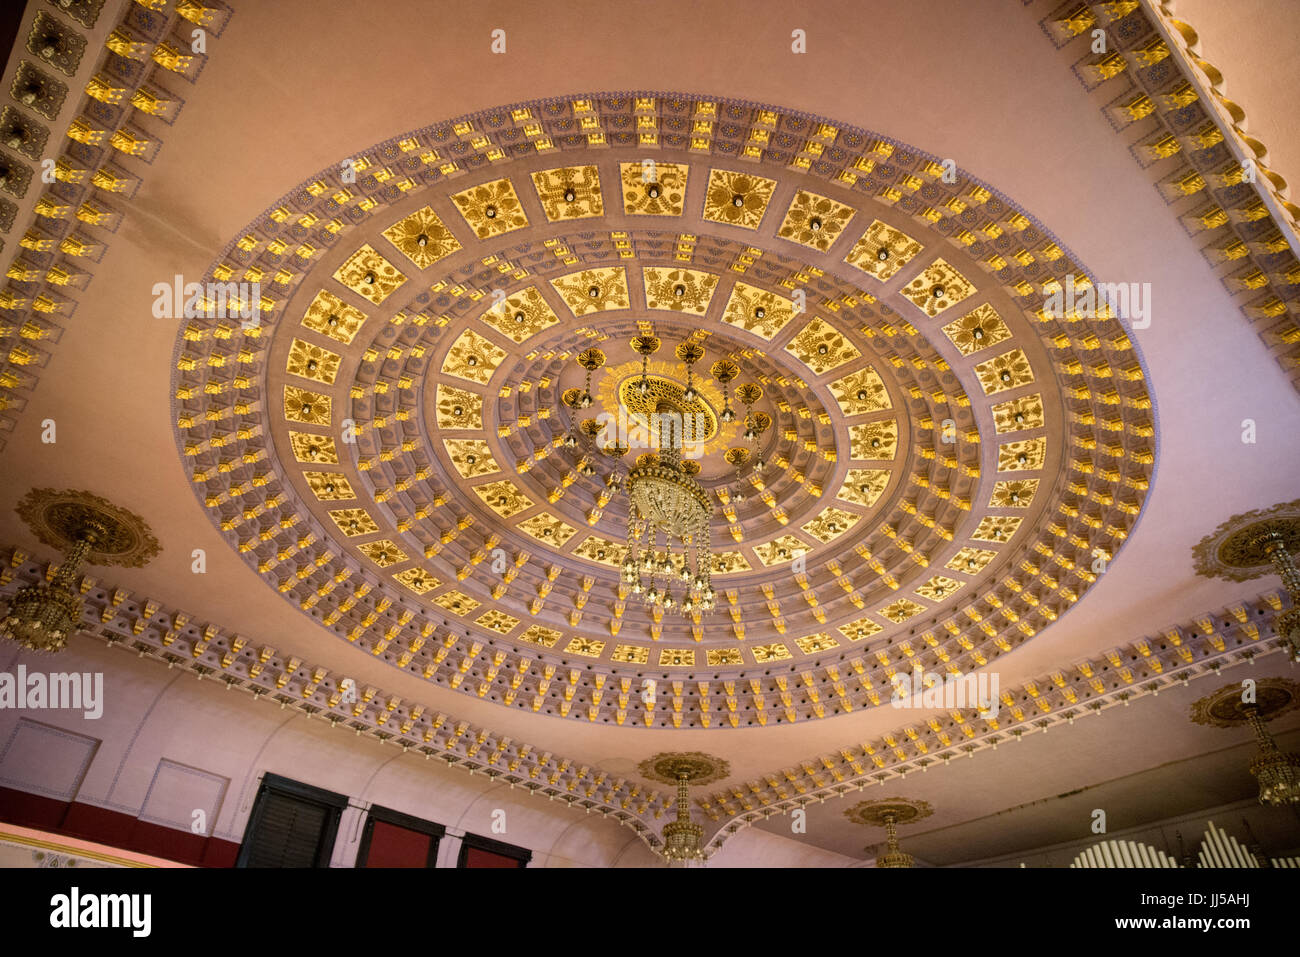 Detail of the ceiling of the theater inside the Palace of Culture, Targu Mures, Romania Stock Photo